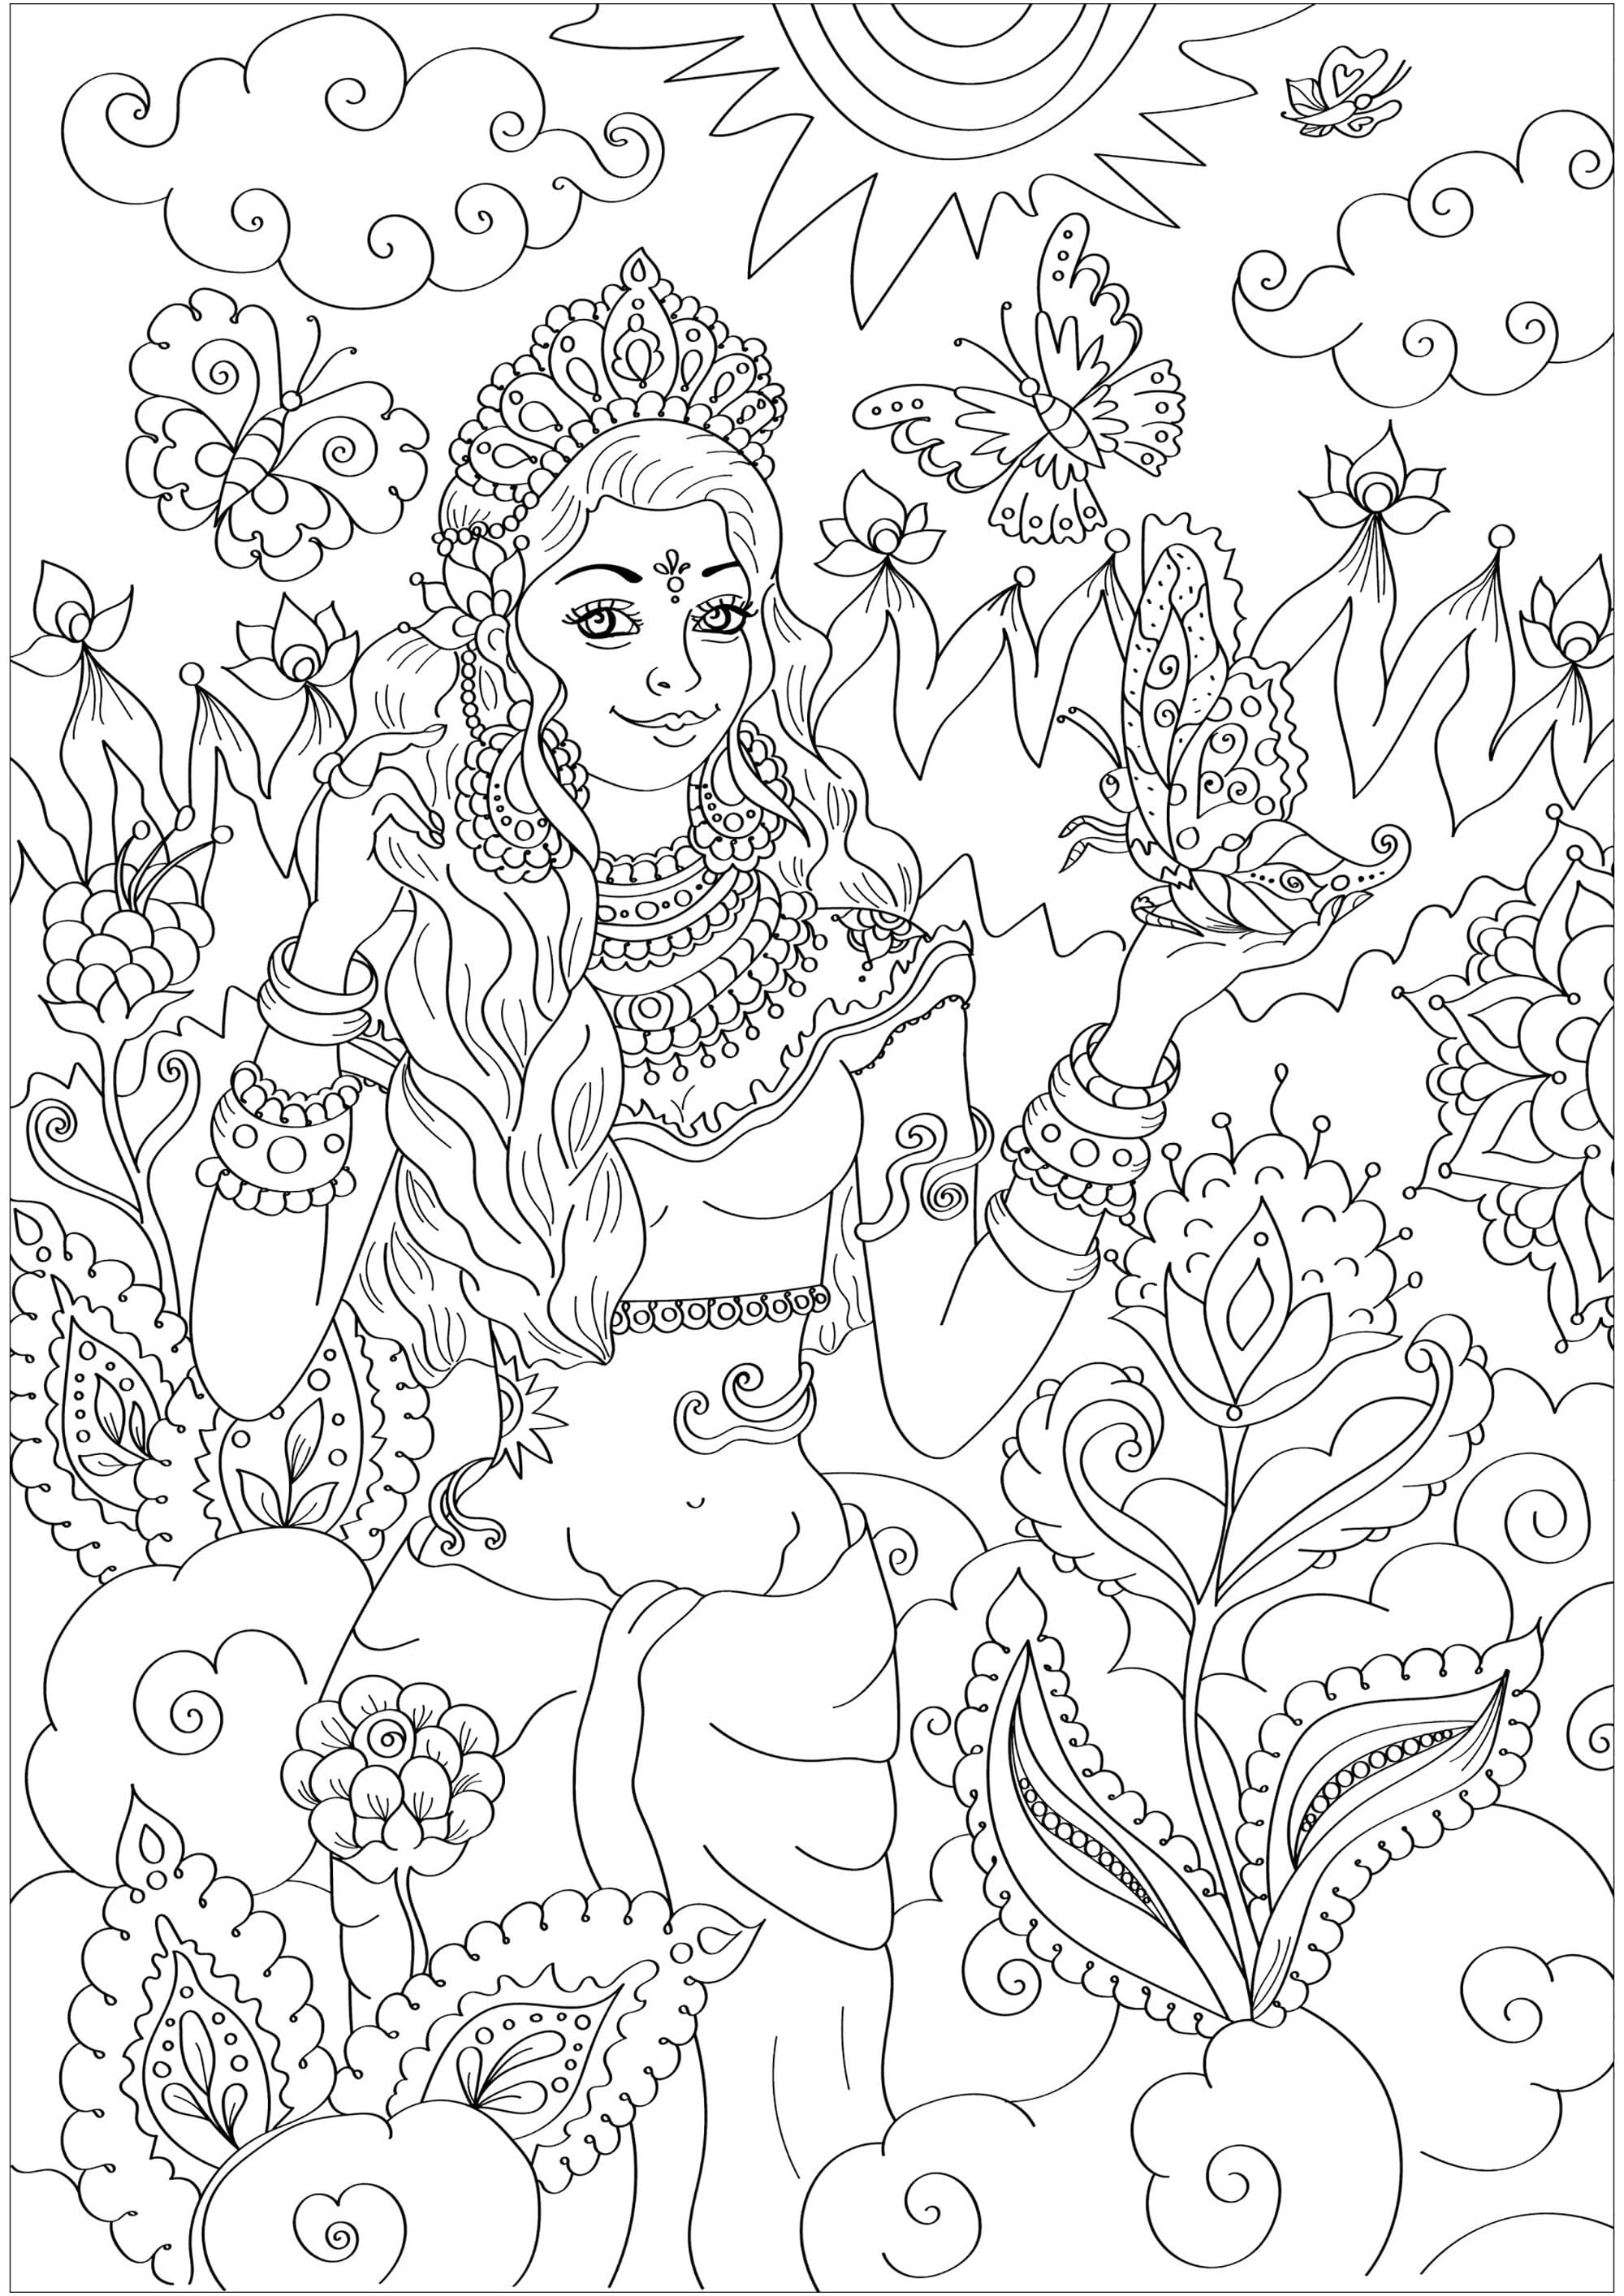 Indian goddess with buterflies and strange flowers and leaves, Source : 123rf   Artist : Katyasuresh